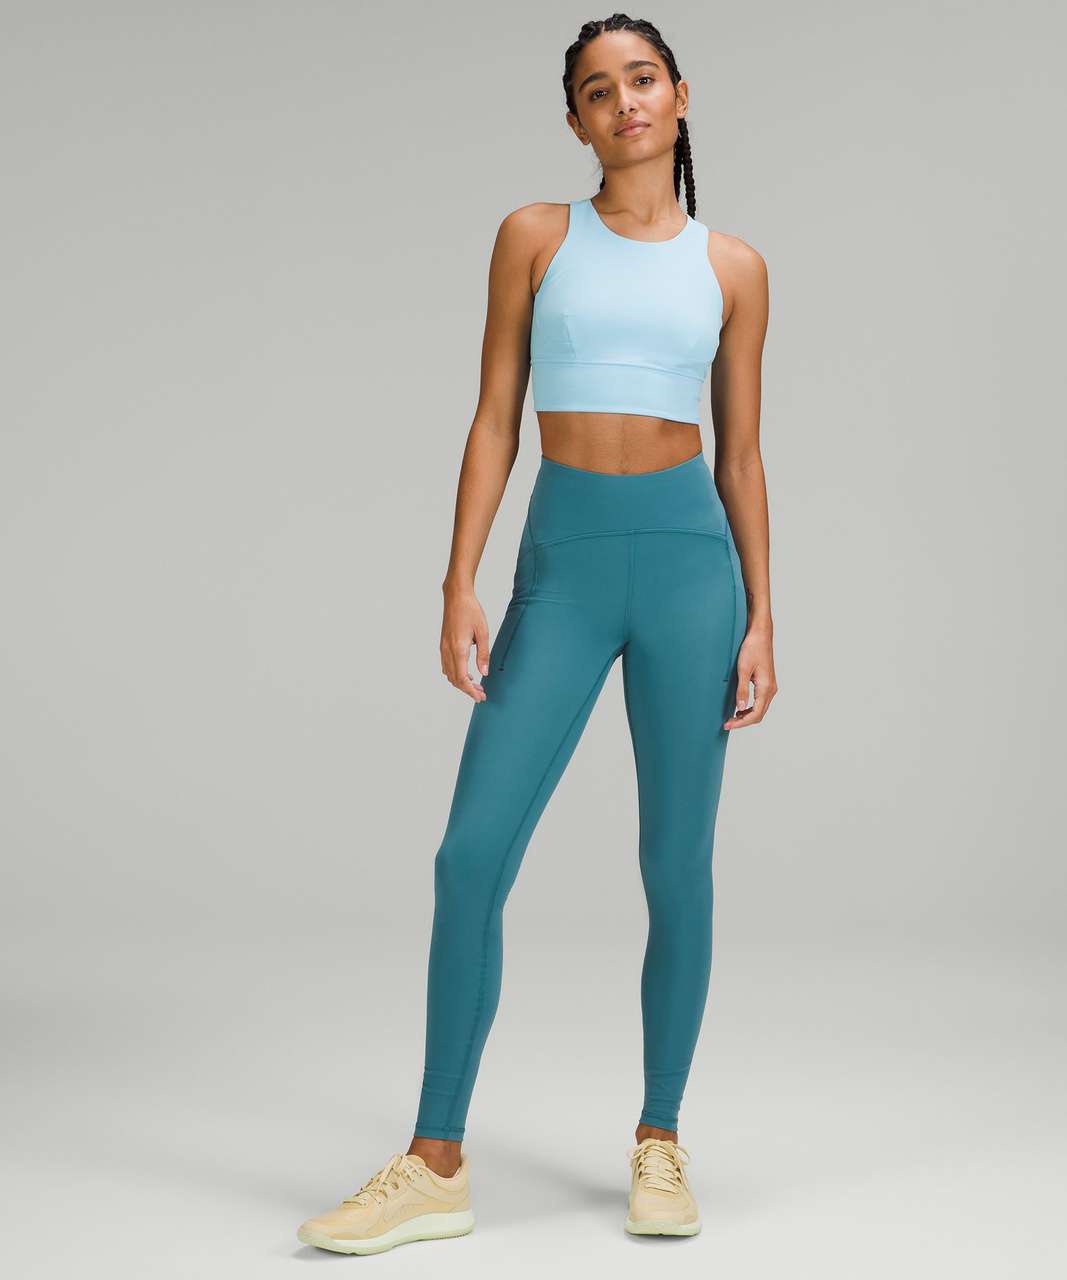 Lululemon Sheer Will HR Tight 28 *Pulse BLUE MESH Nulux NWT Size